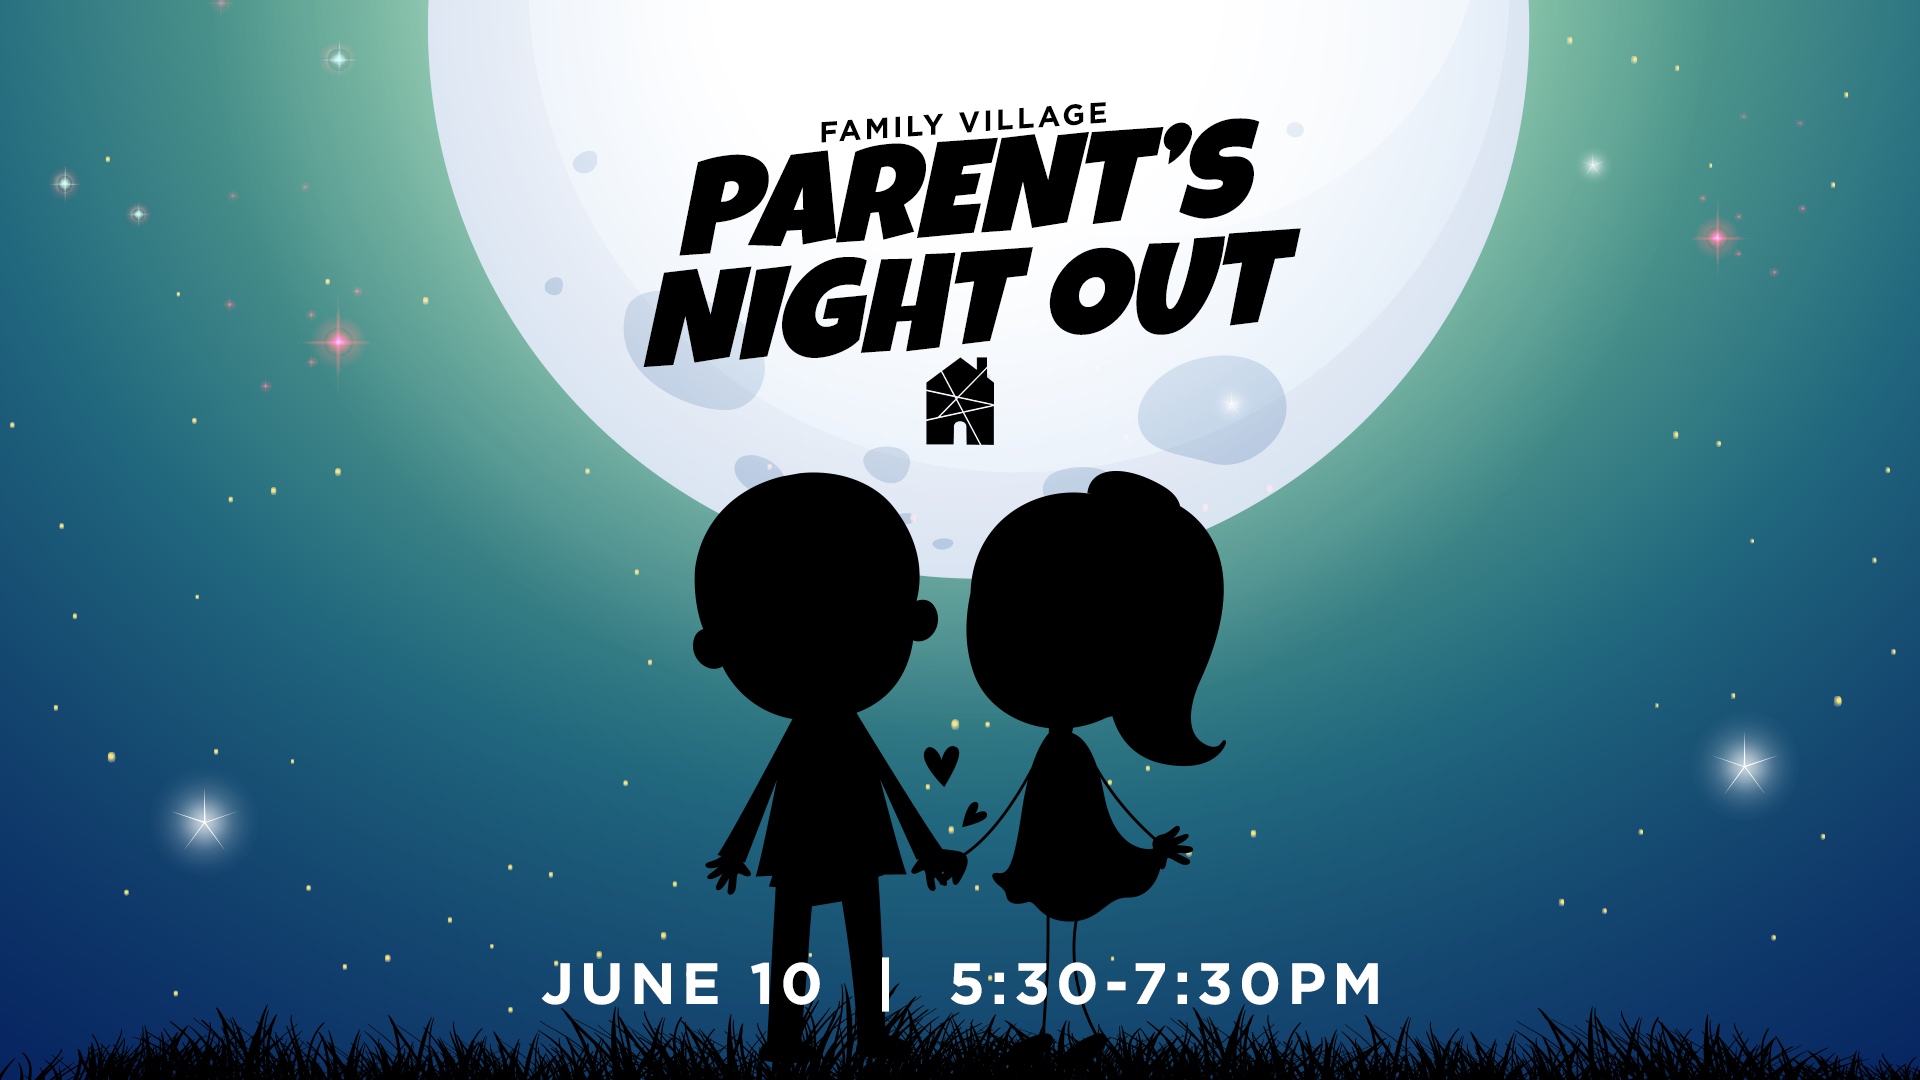 Parents Night Out with Family Village